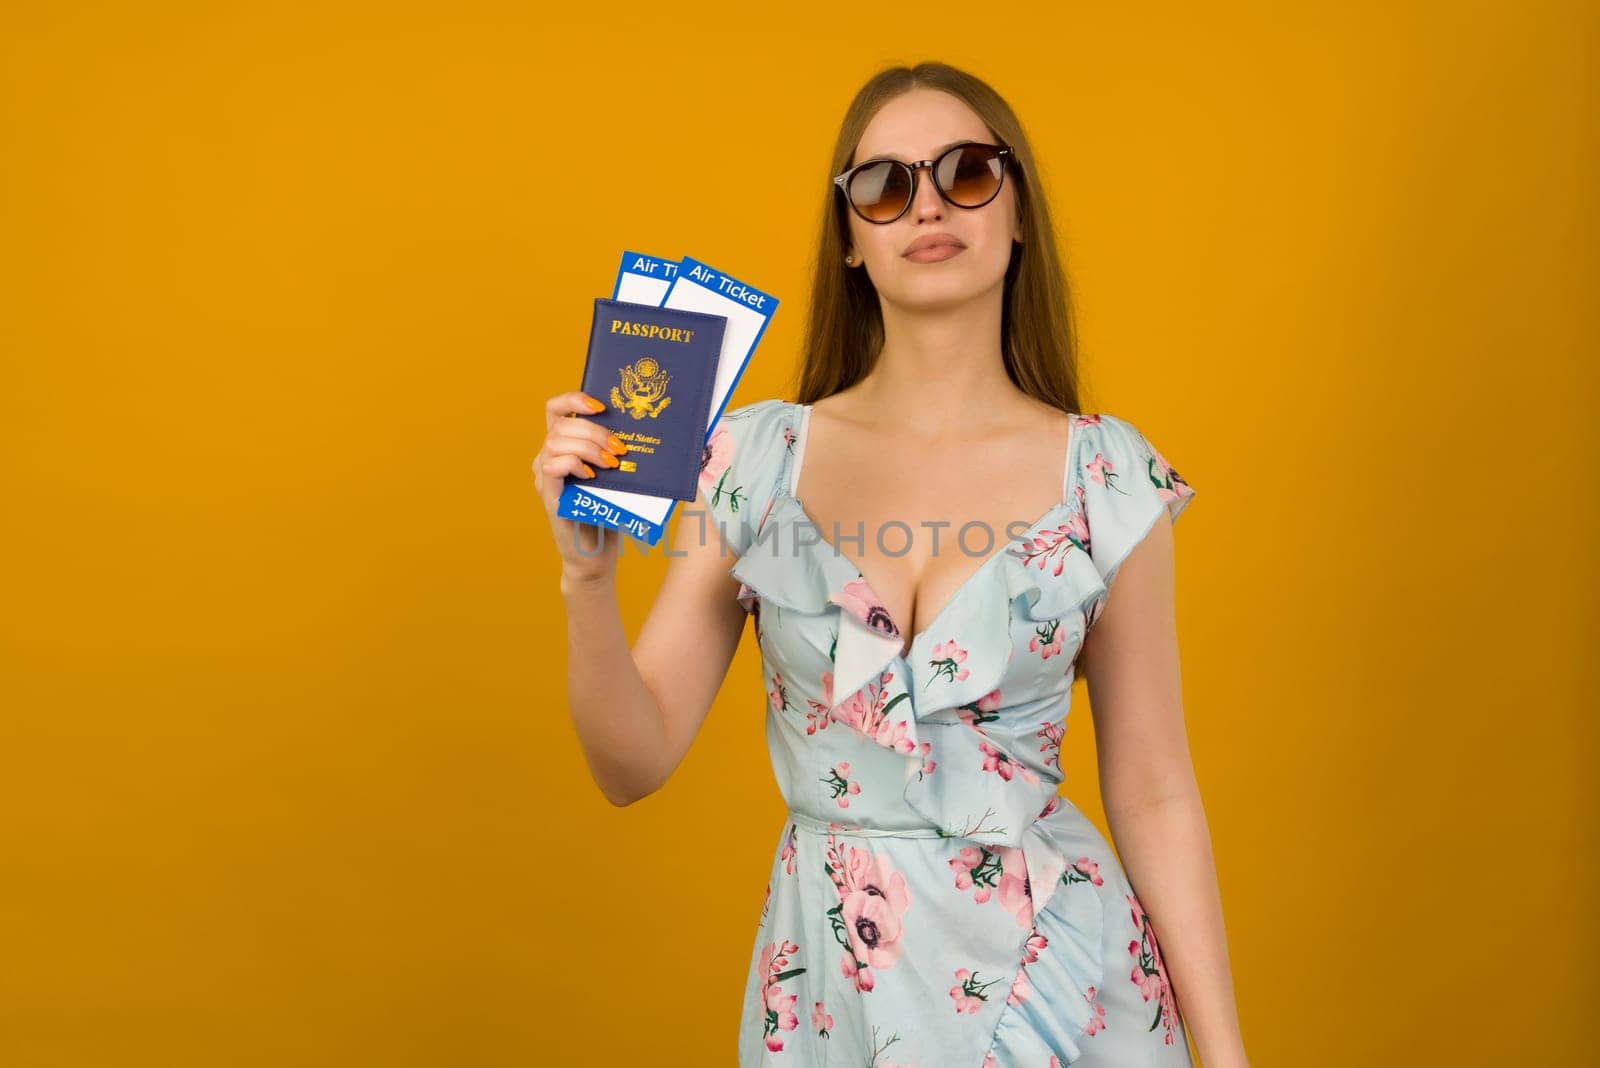 Joyful young woman in blue dress with flowers and sunglasses is holding airline tickets with a passport on a yellow background. by zartarn